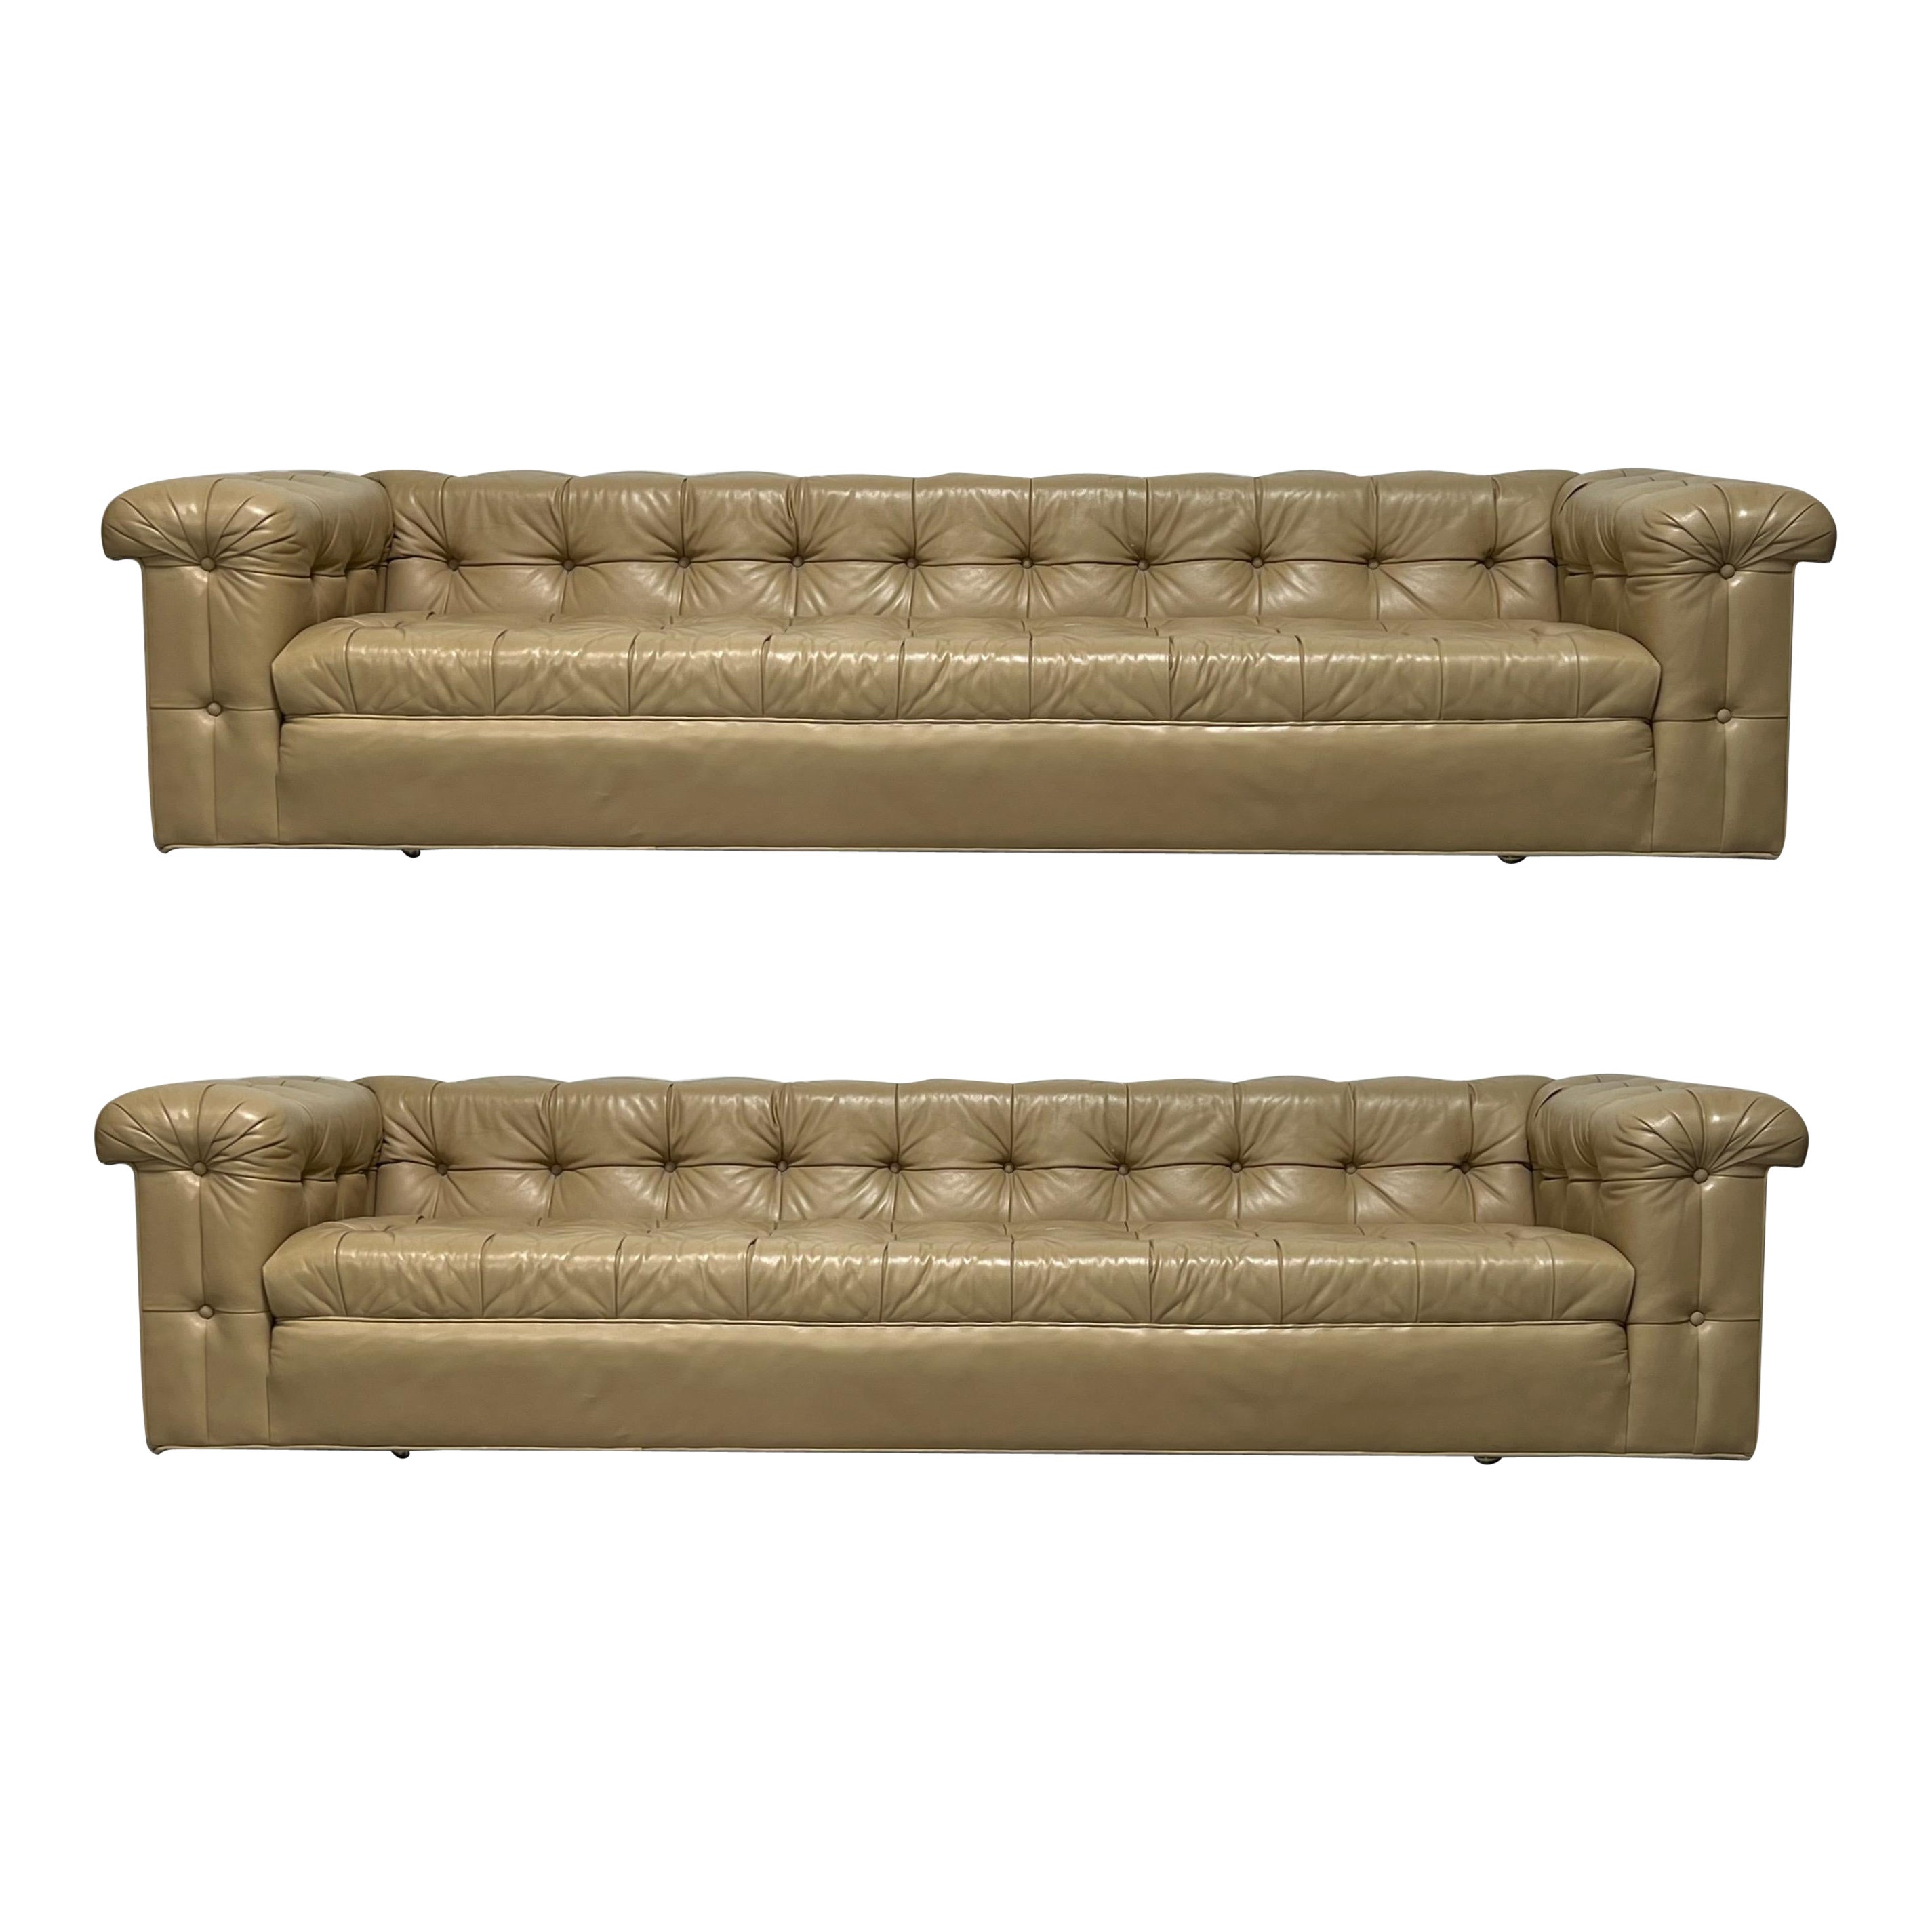 Pair of Party Sofas by Edward Wormley for Dunbar in Original Leather For Sale